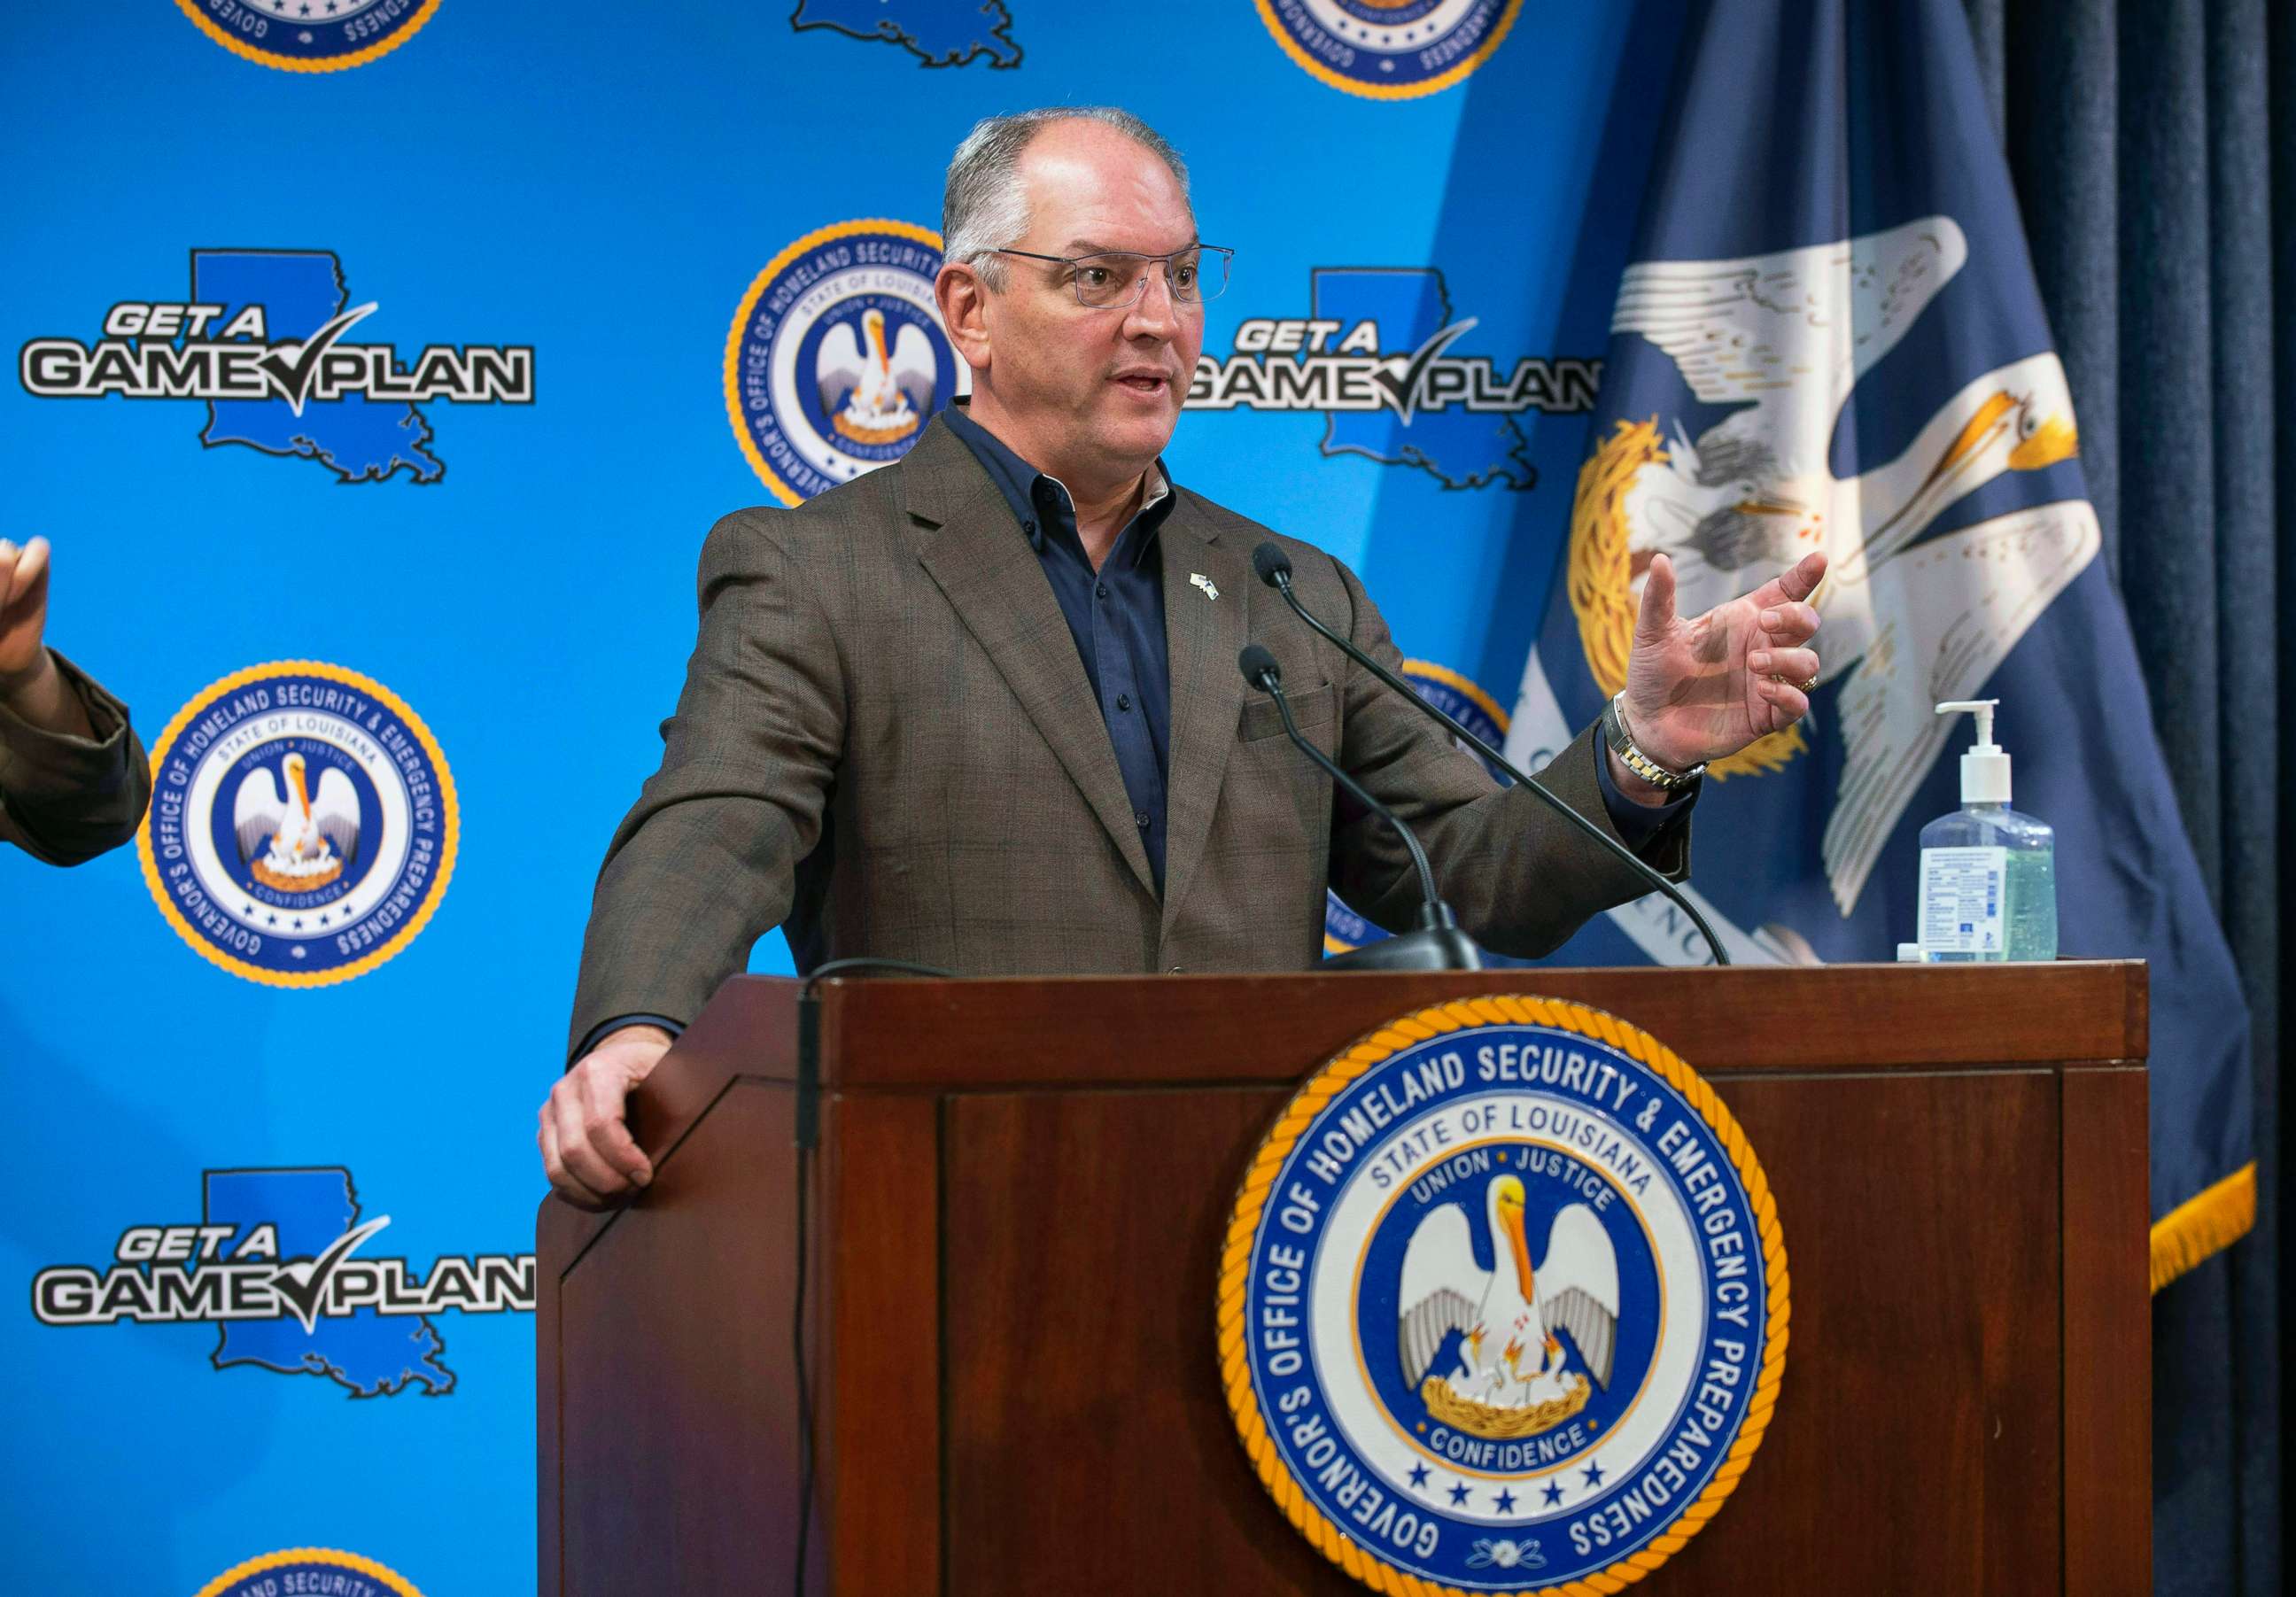 PHOTO: Louisiana Gov. John Bel Edwards speaks at a briefing on the state's current situation dealing with the novel coronavirus COVID-19 public health threat, April 14, 2020 in Baton Rouge, La.